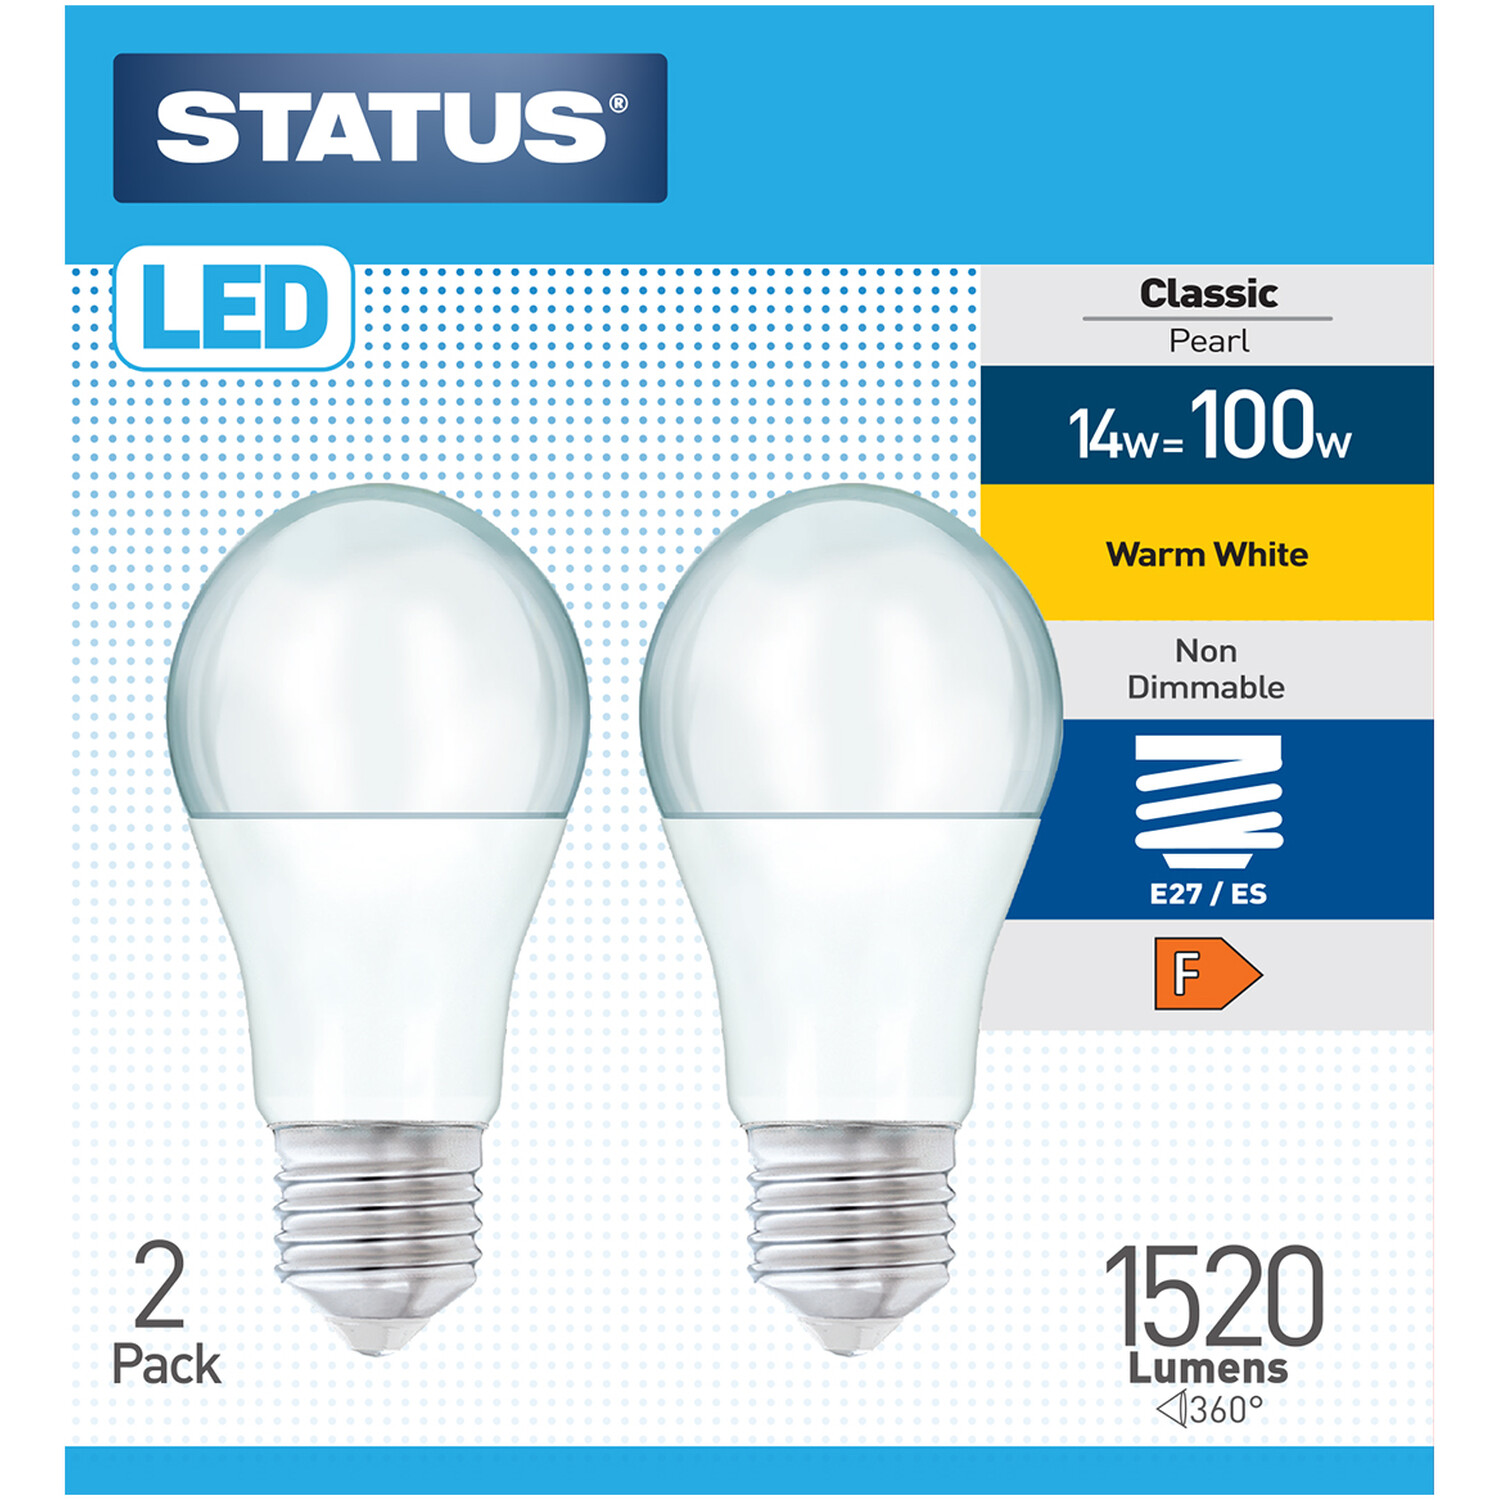 Pack of 2 Status LED 14W Non-Dimmable Classic Pearl Lightbulbs - Edison Screw / ES Image 1